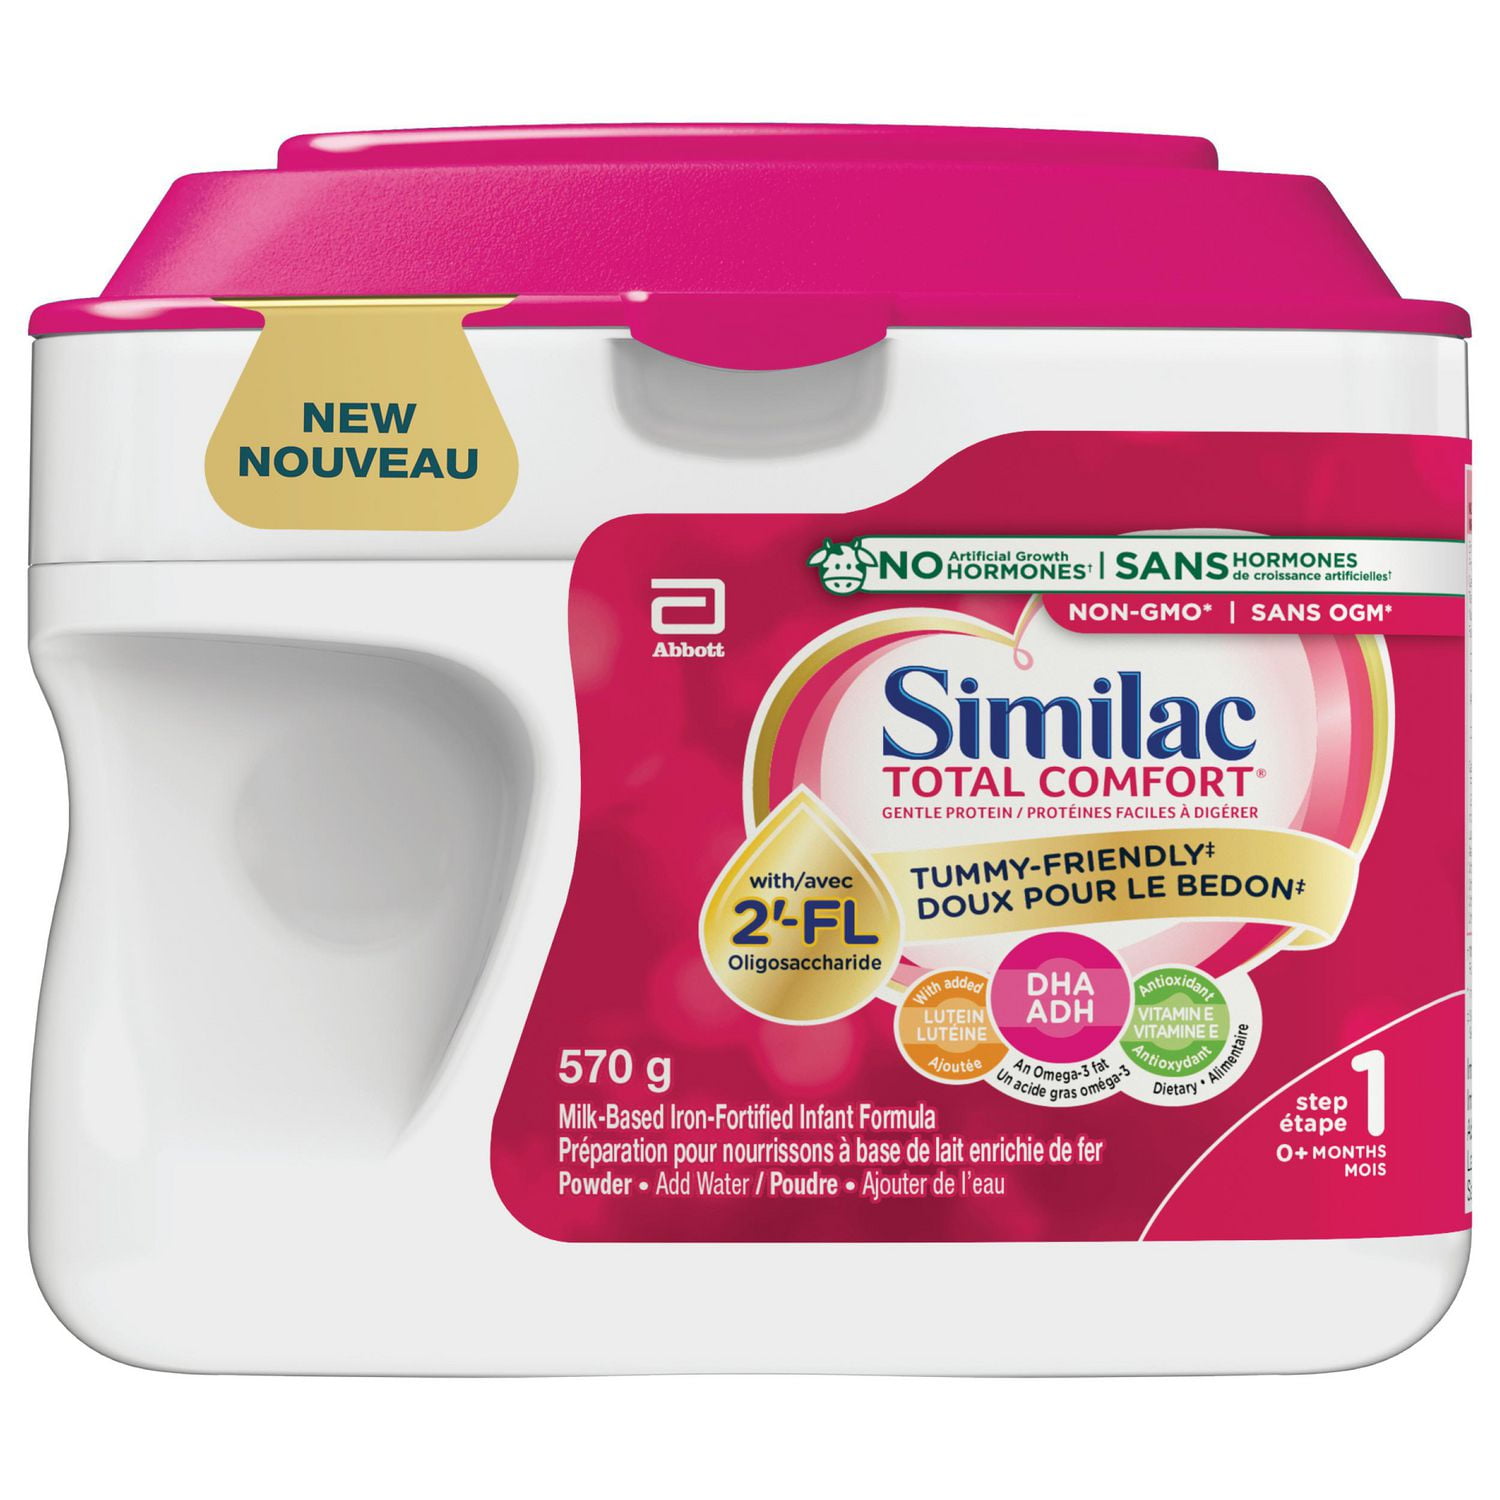 Similac Total Comfort, Baby Formula, Tummy-Friendly, Easy To Digest, Now  With Breast Milk-Inspired Innovation 2'-FL, 0+ Months, Powder, 570 g, 570 G  